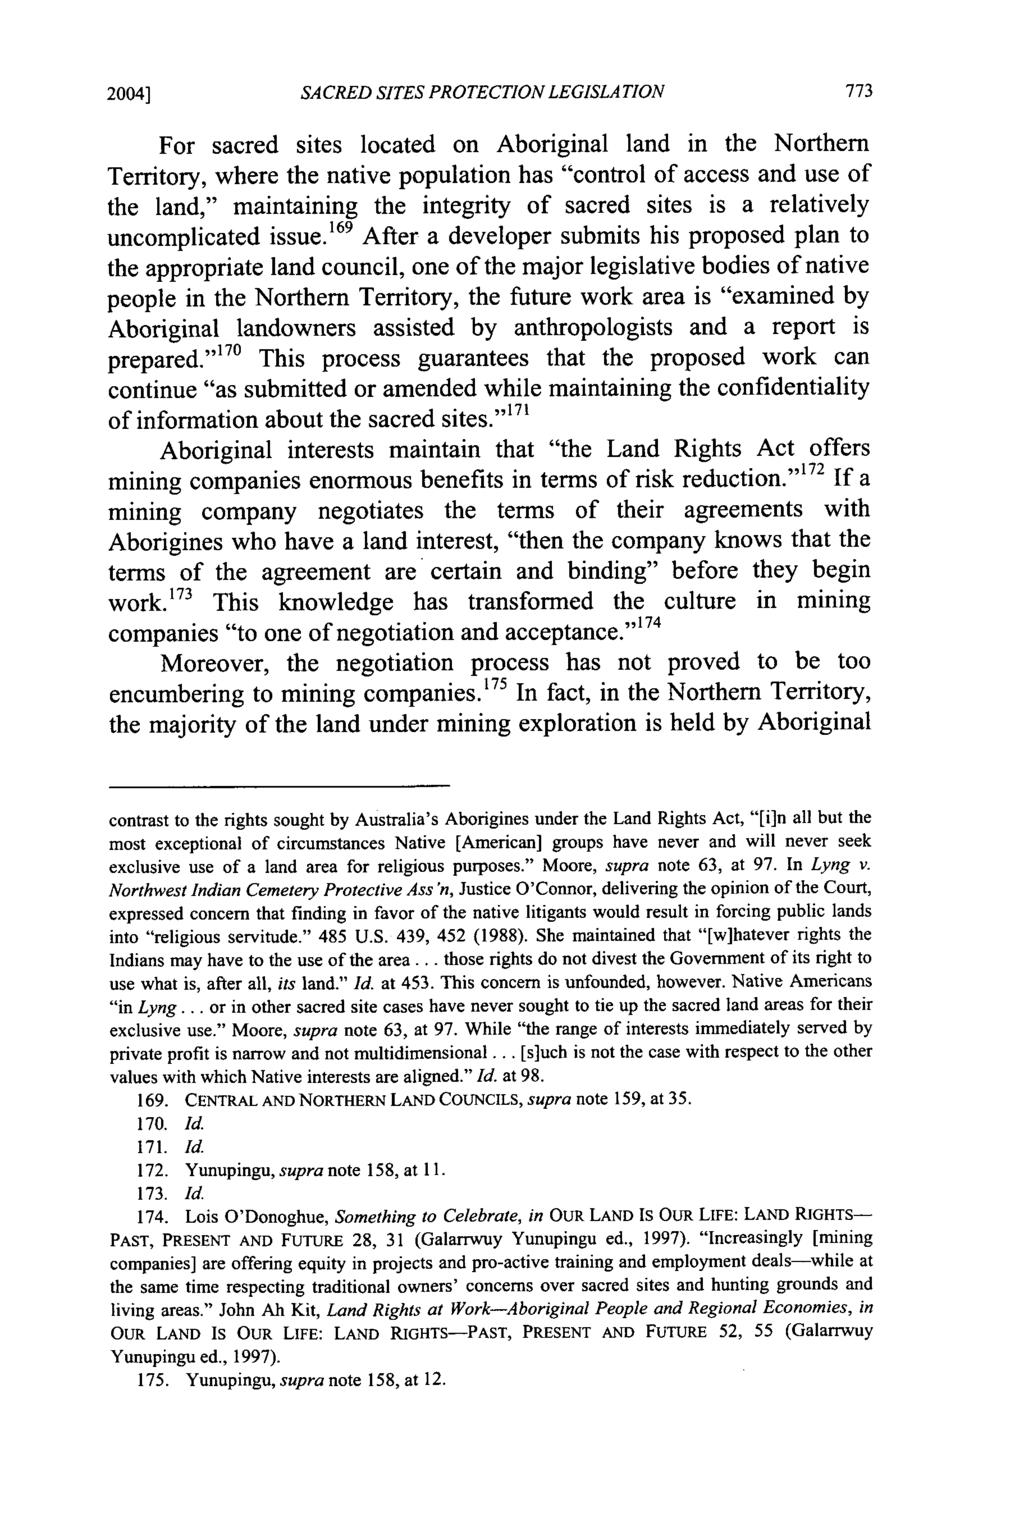 2004] McDonald: Secularizing the Sacrosanct: Defining "Sacred" for Native America SACRED SITES PROTECTION LEGISLATION For sacred sites located on Aboriginal land in the Northern Territory, where the